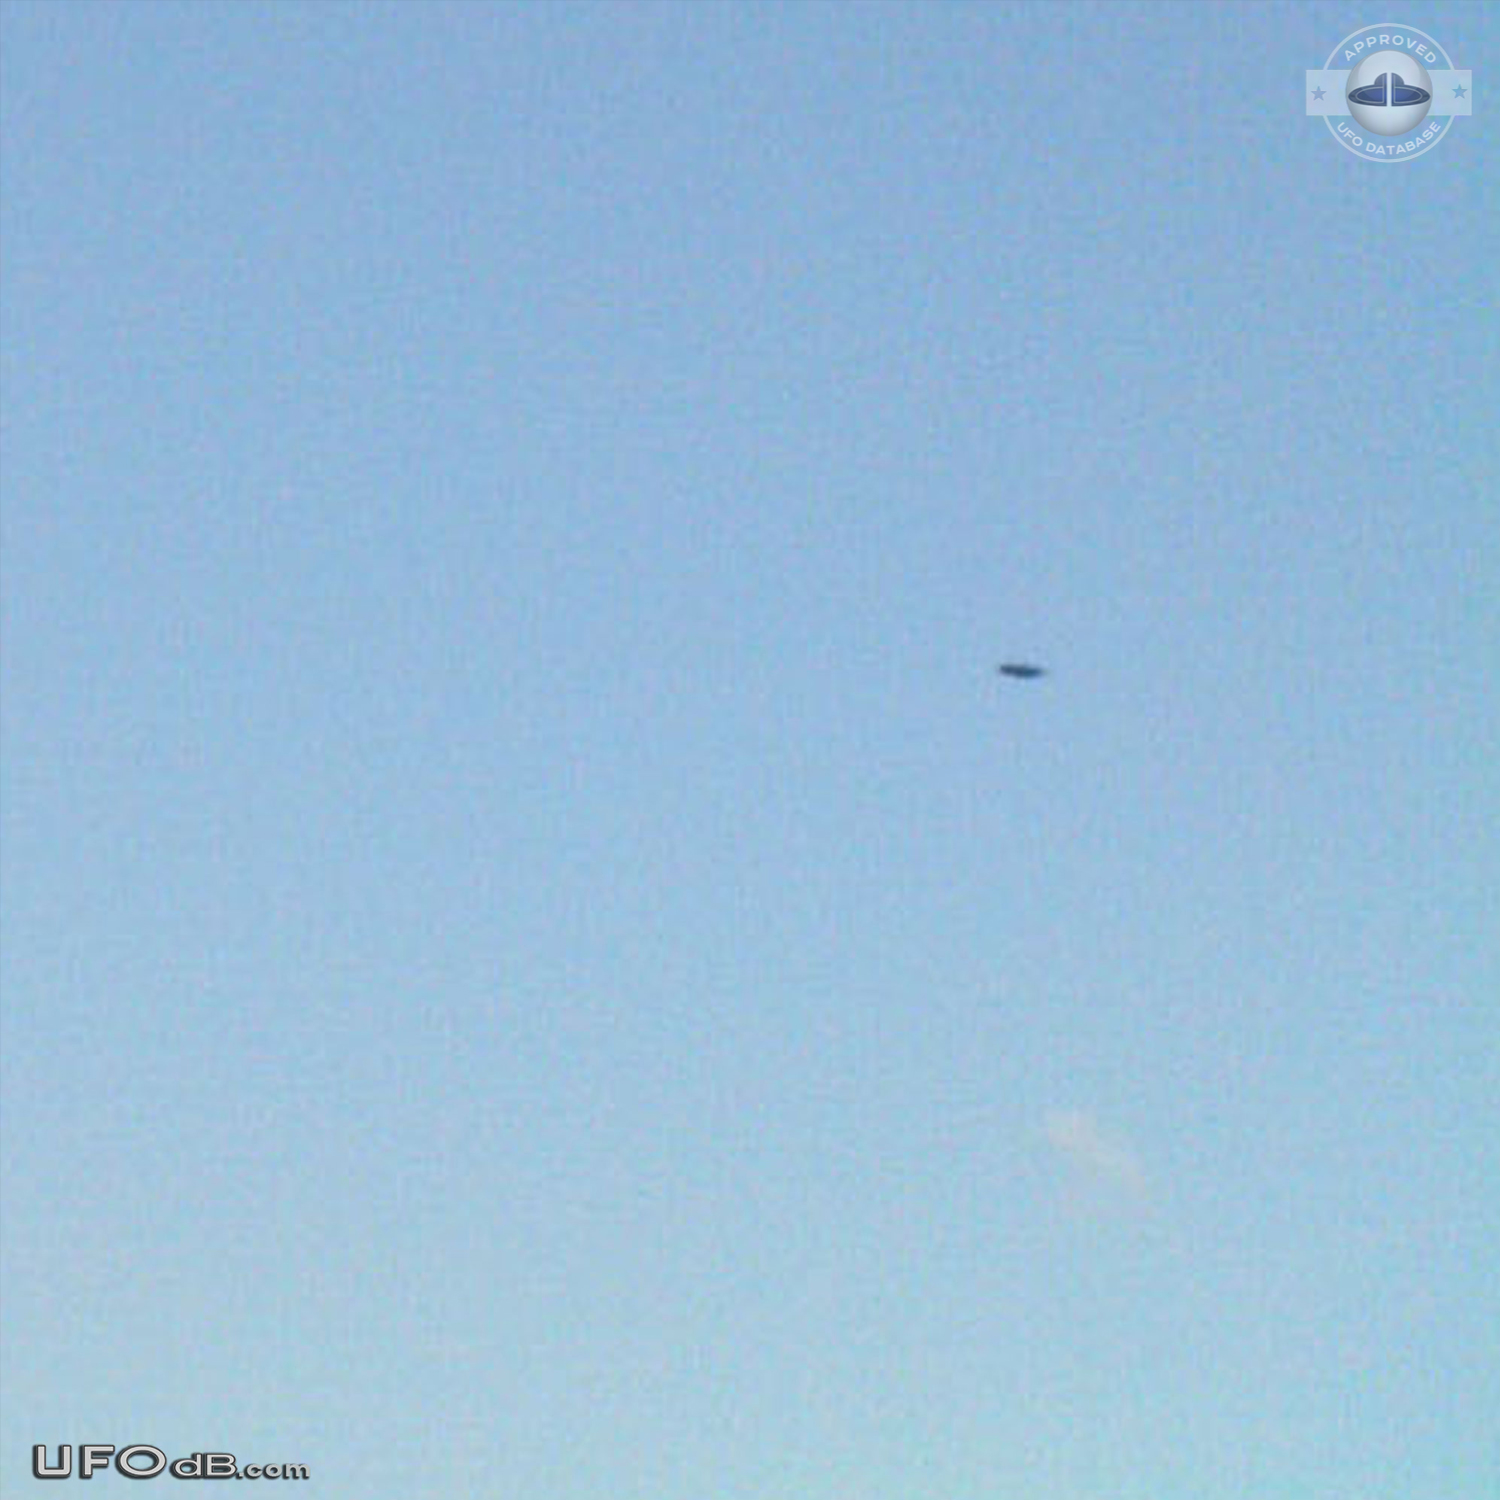 Silver saucer UFO caught on picture in Clarksville Tennessee USA 2012 UFO Picture #473-1